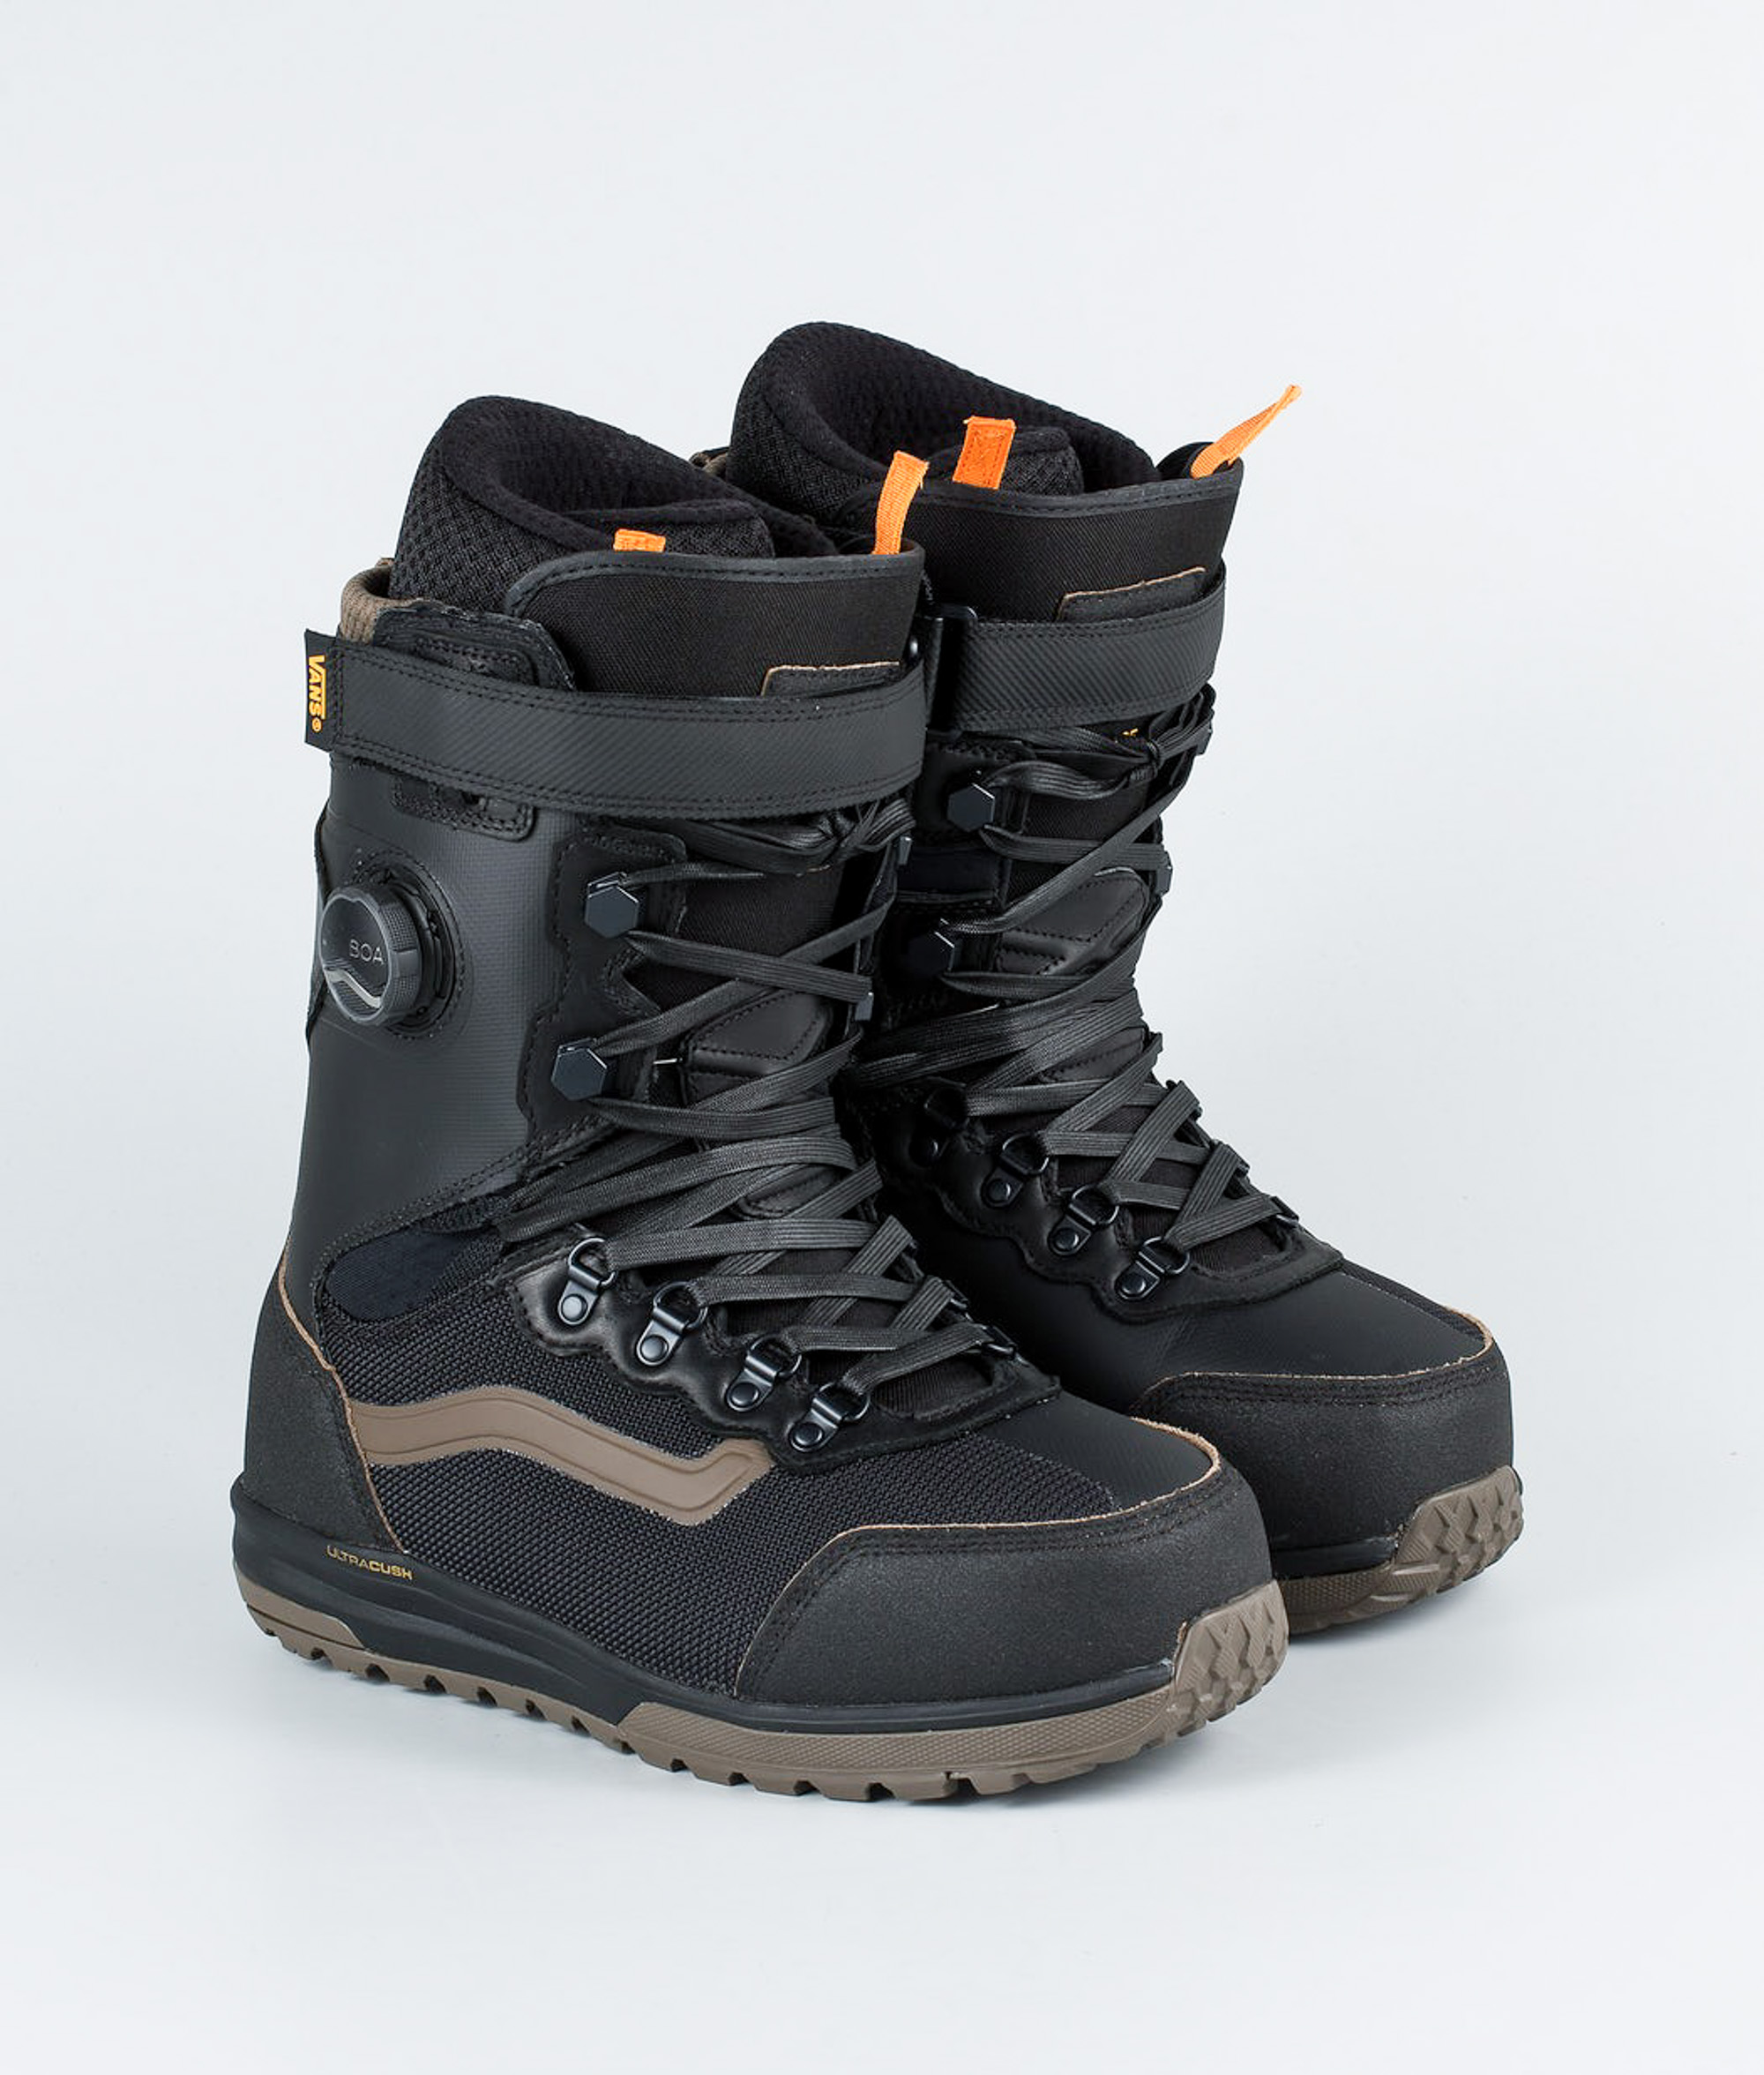 vans infuse boots